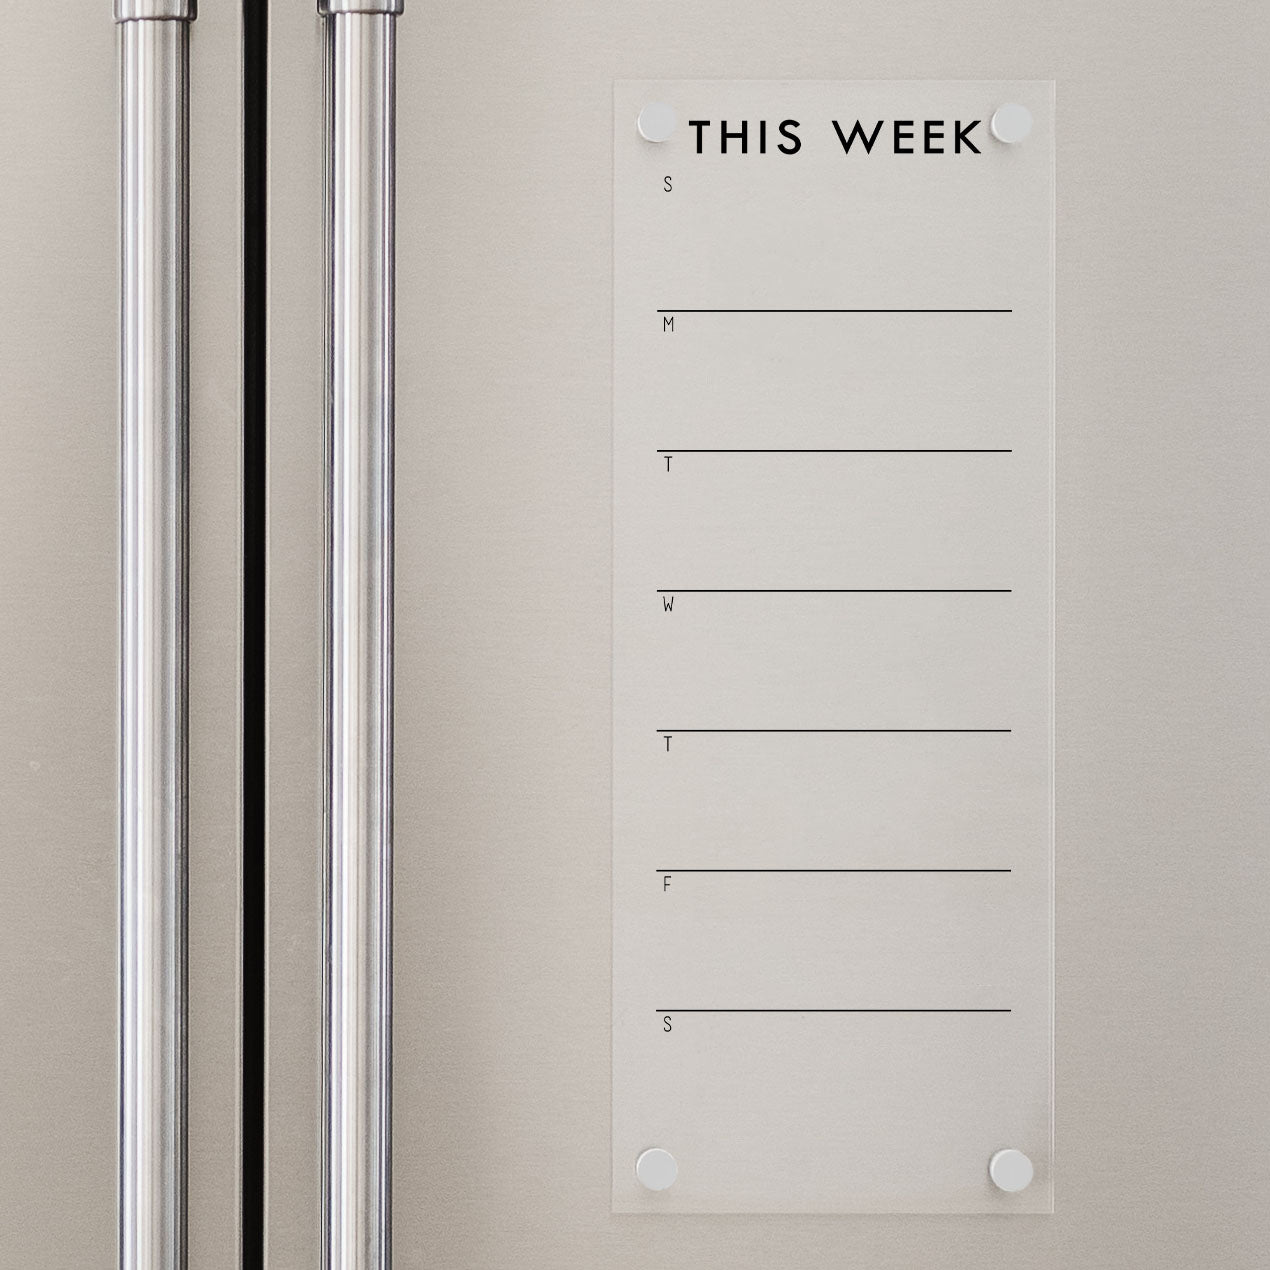 A skinny dry-erase weekly calender made of acrylic hanging on the fridge